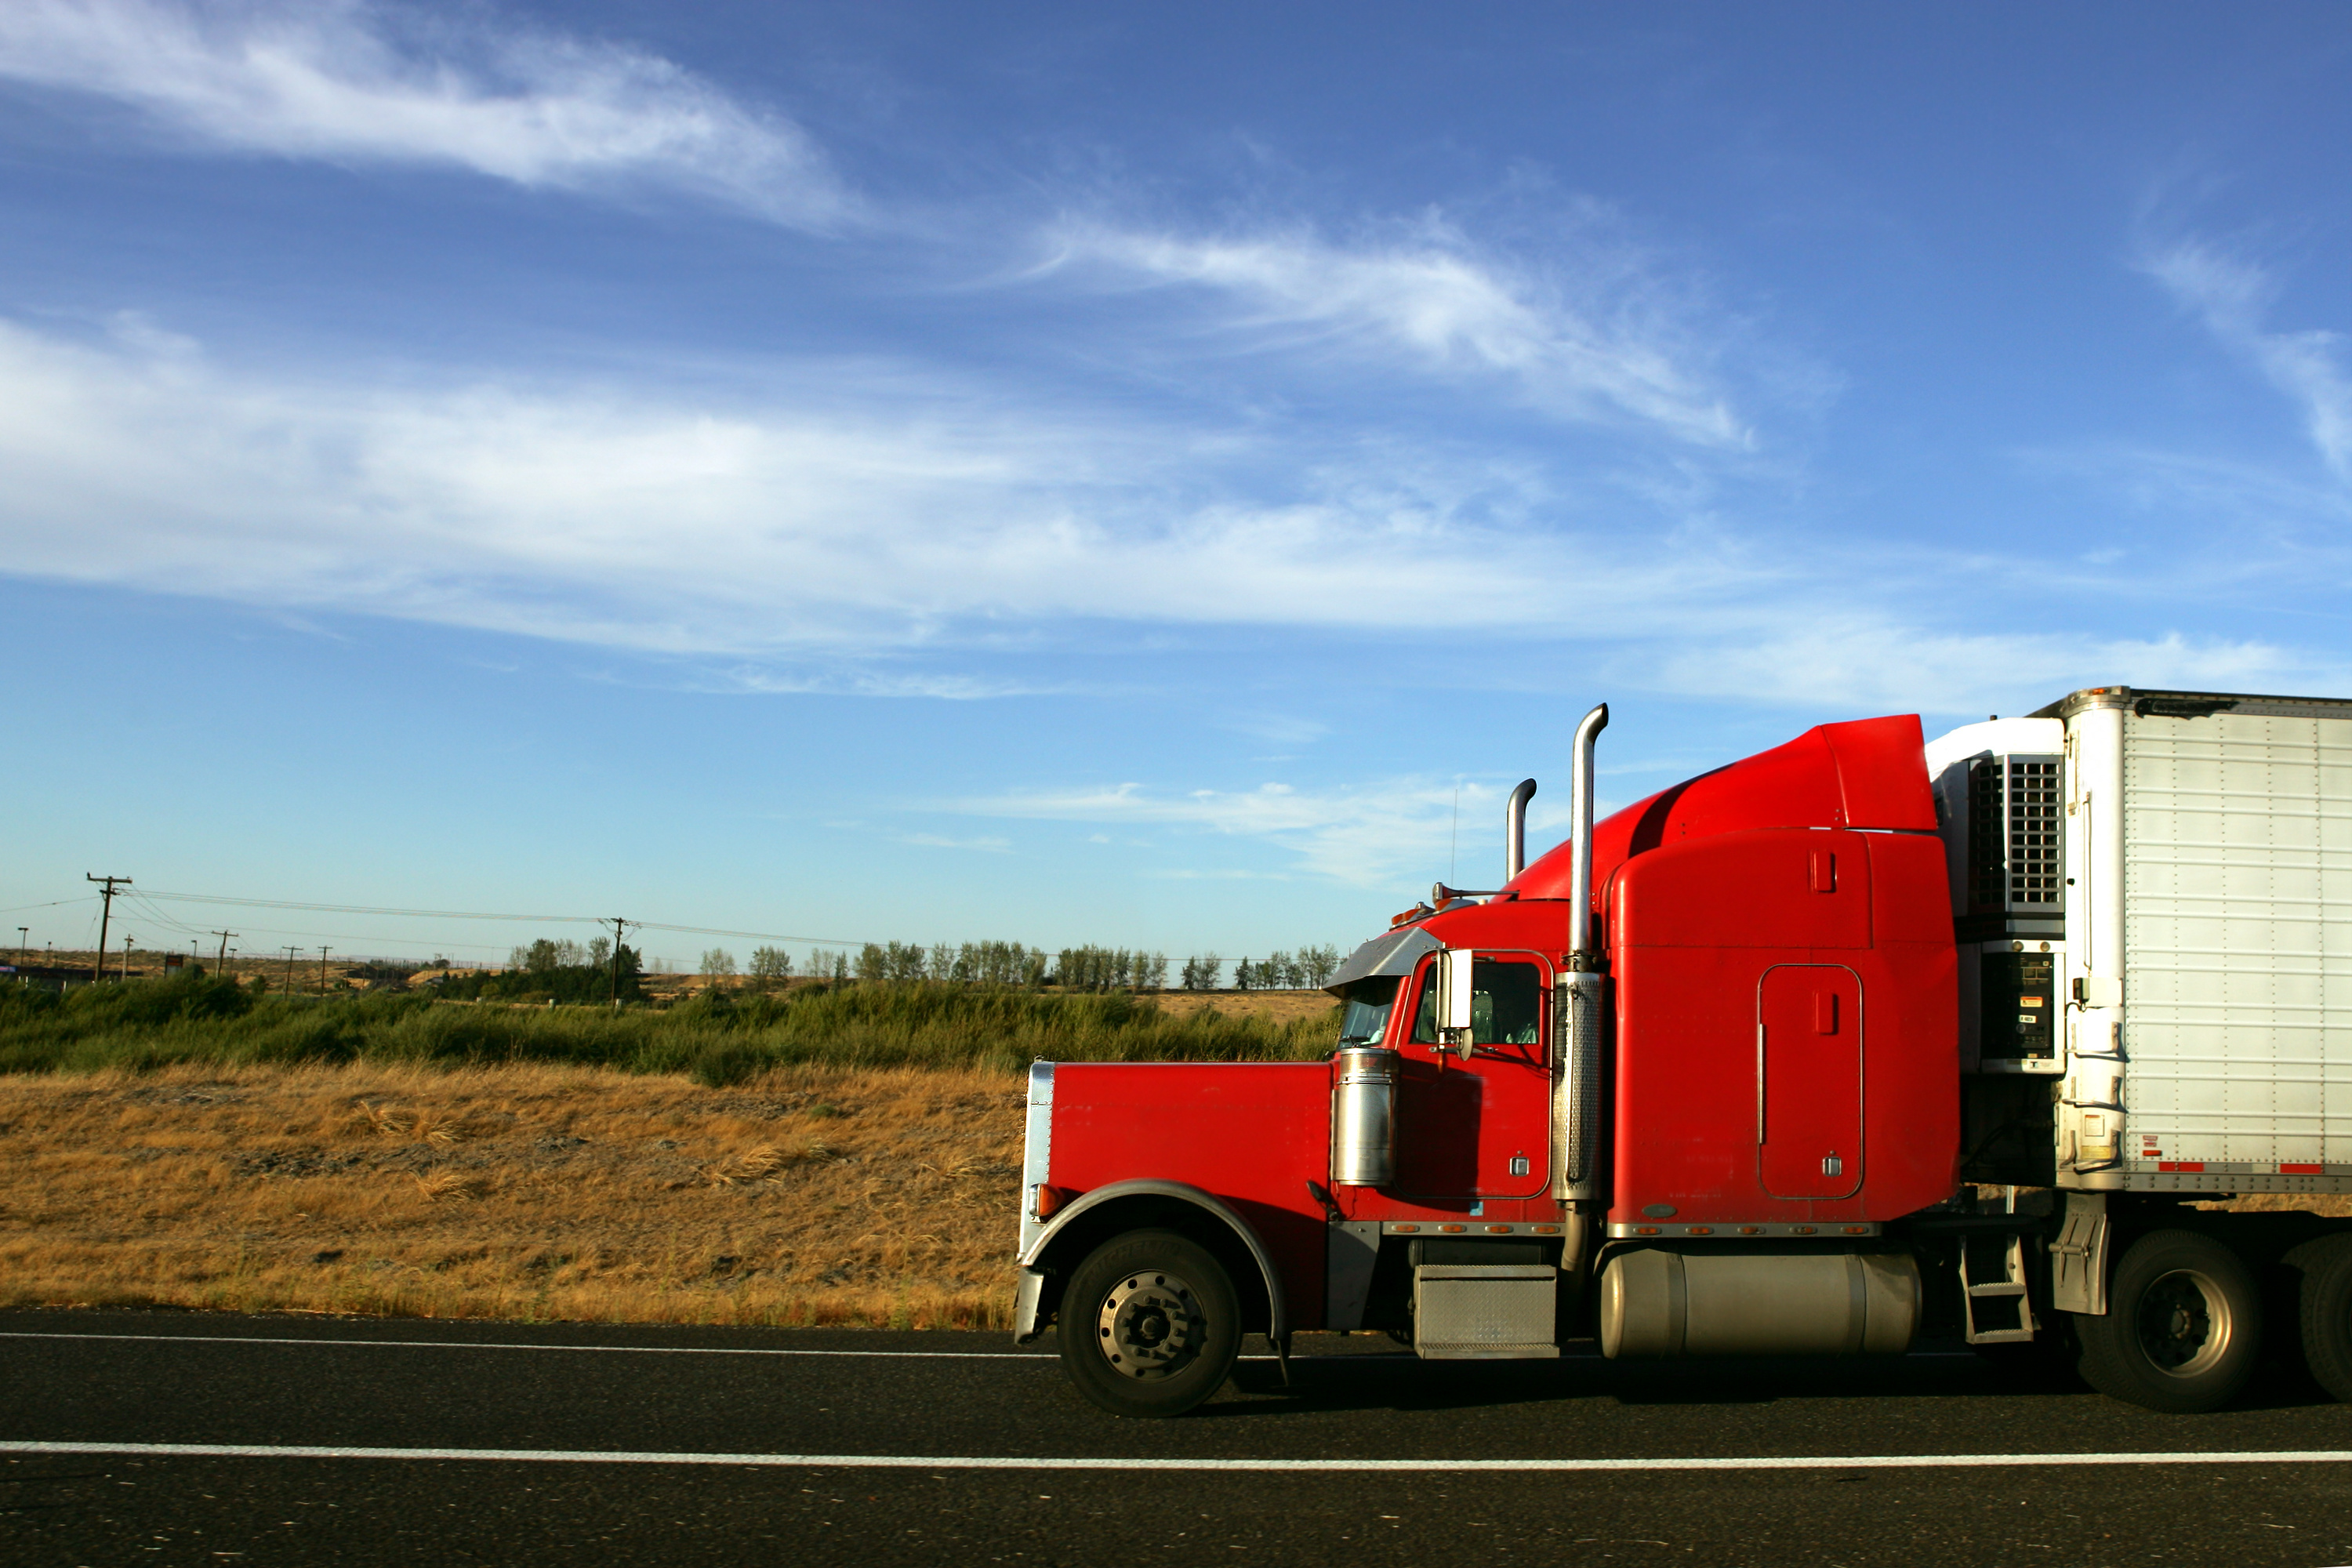 Red Truck, trucking industry, safety culture, safety climate, consulting, research